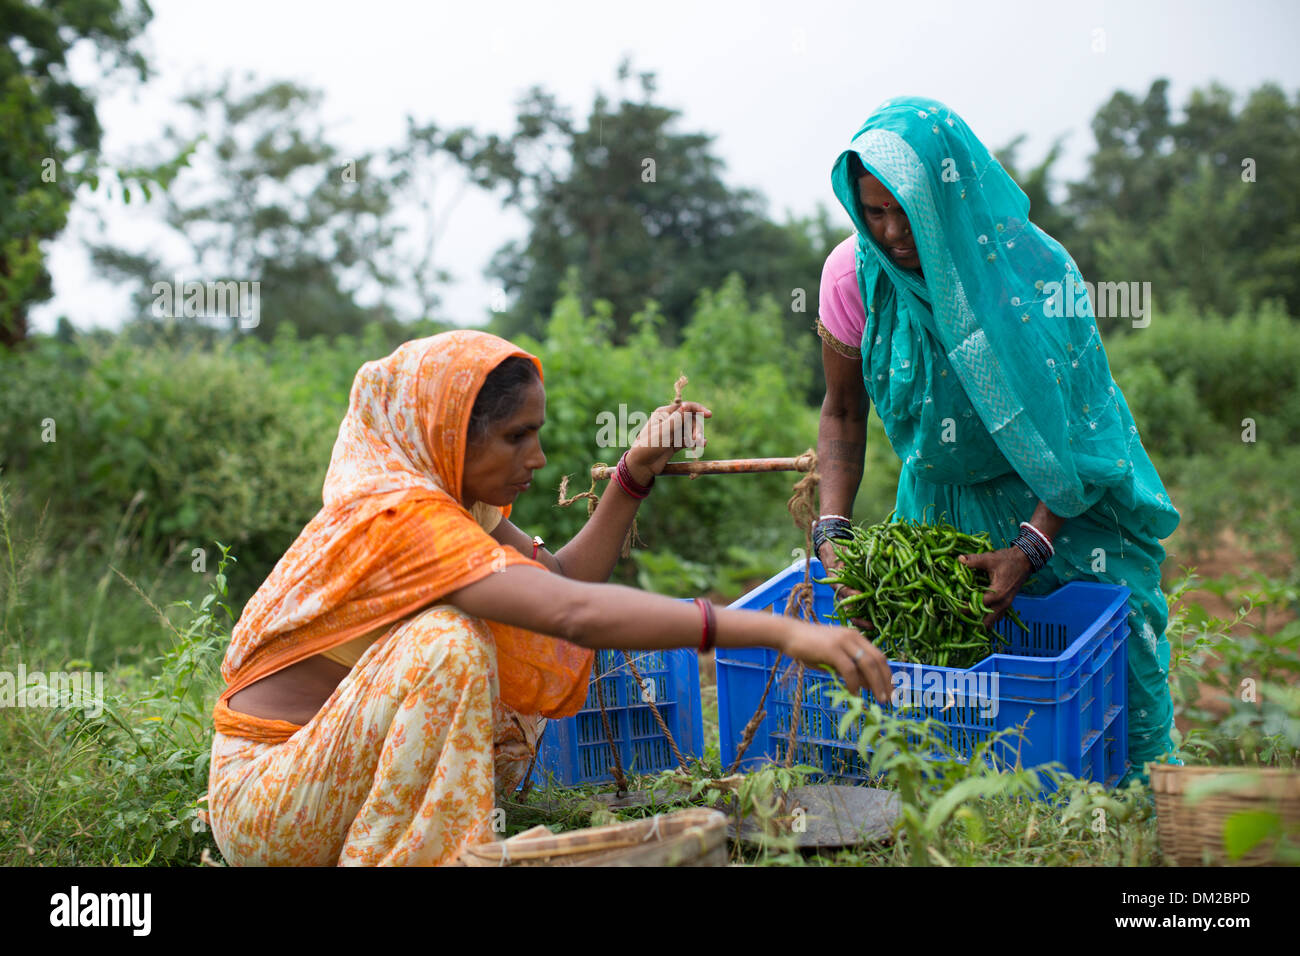 Woman farmers in Bihar, India weigh a chili harvest. Stock Photo